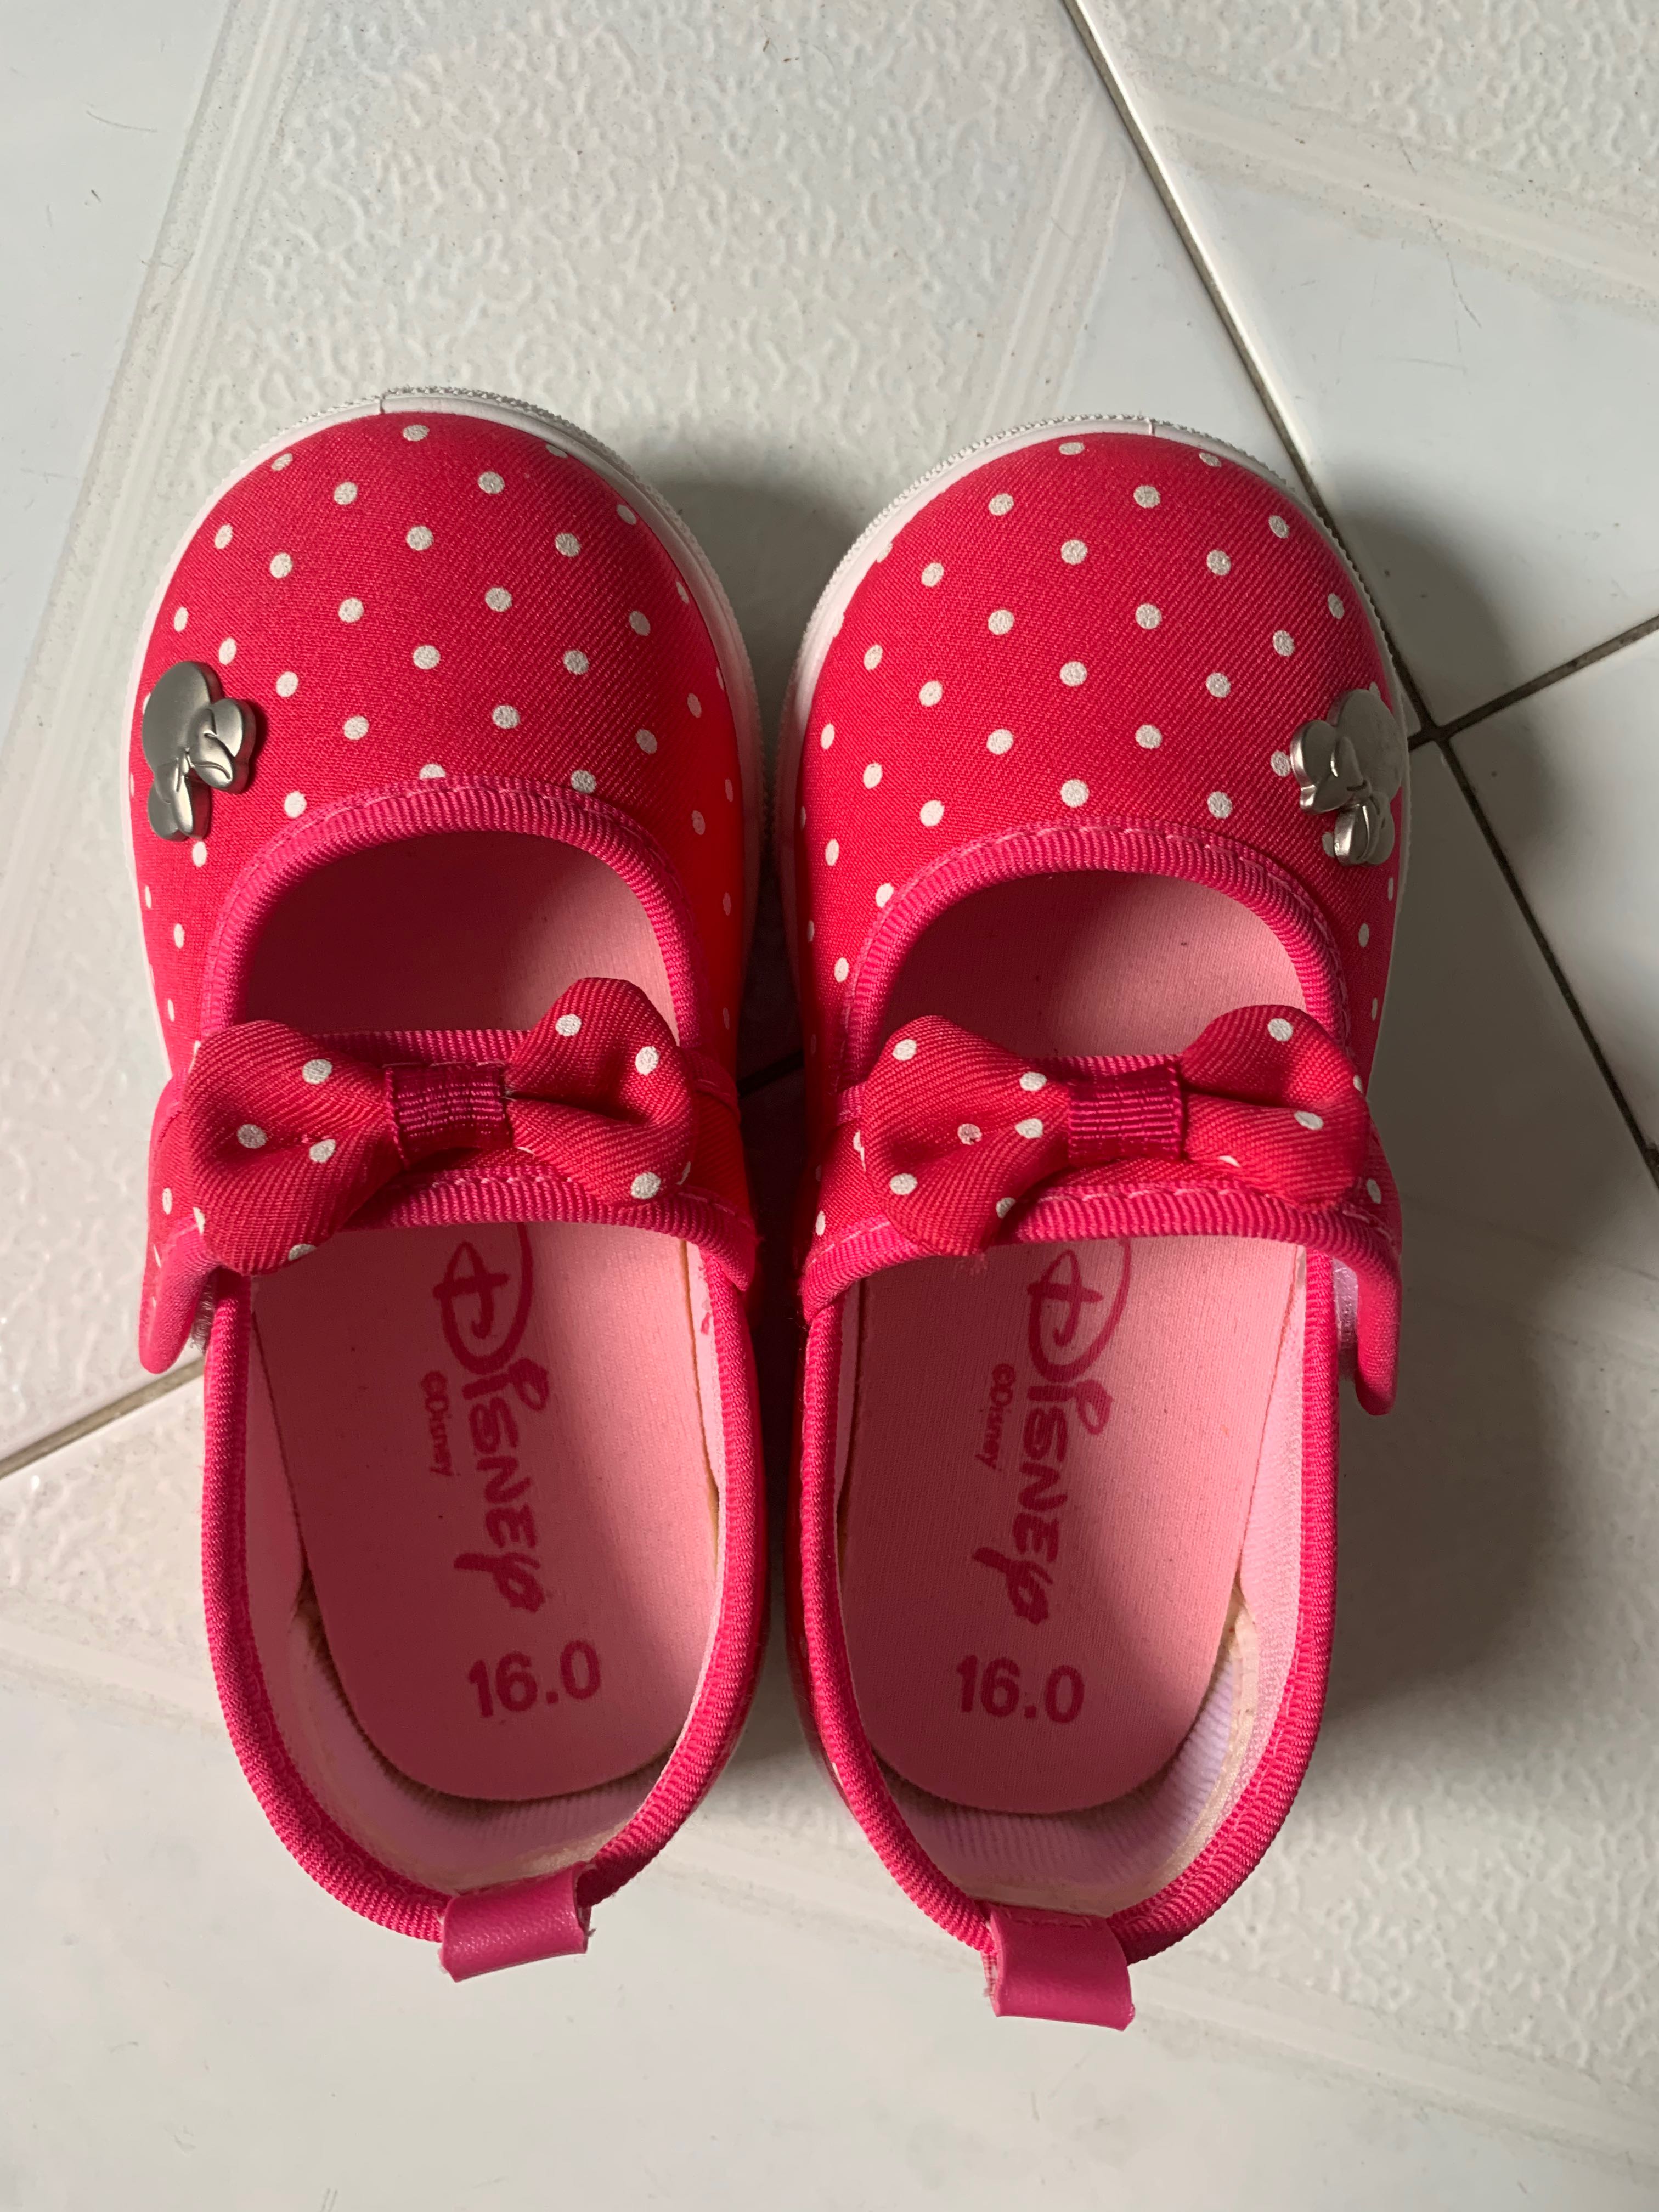 minnie mouse shoes for babies